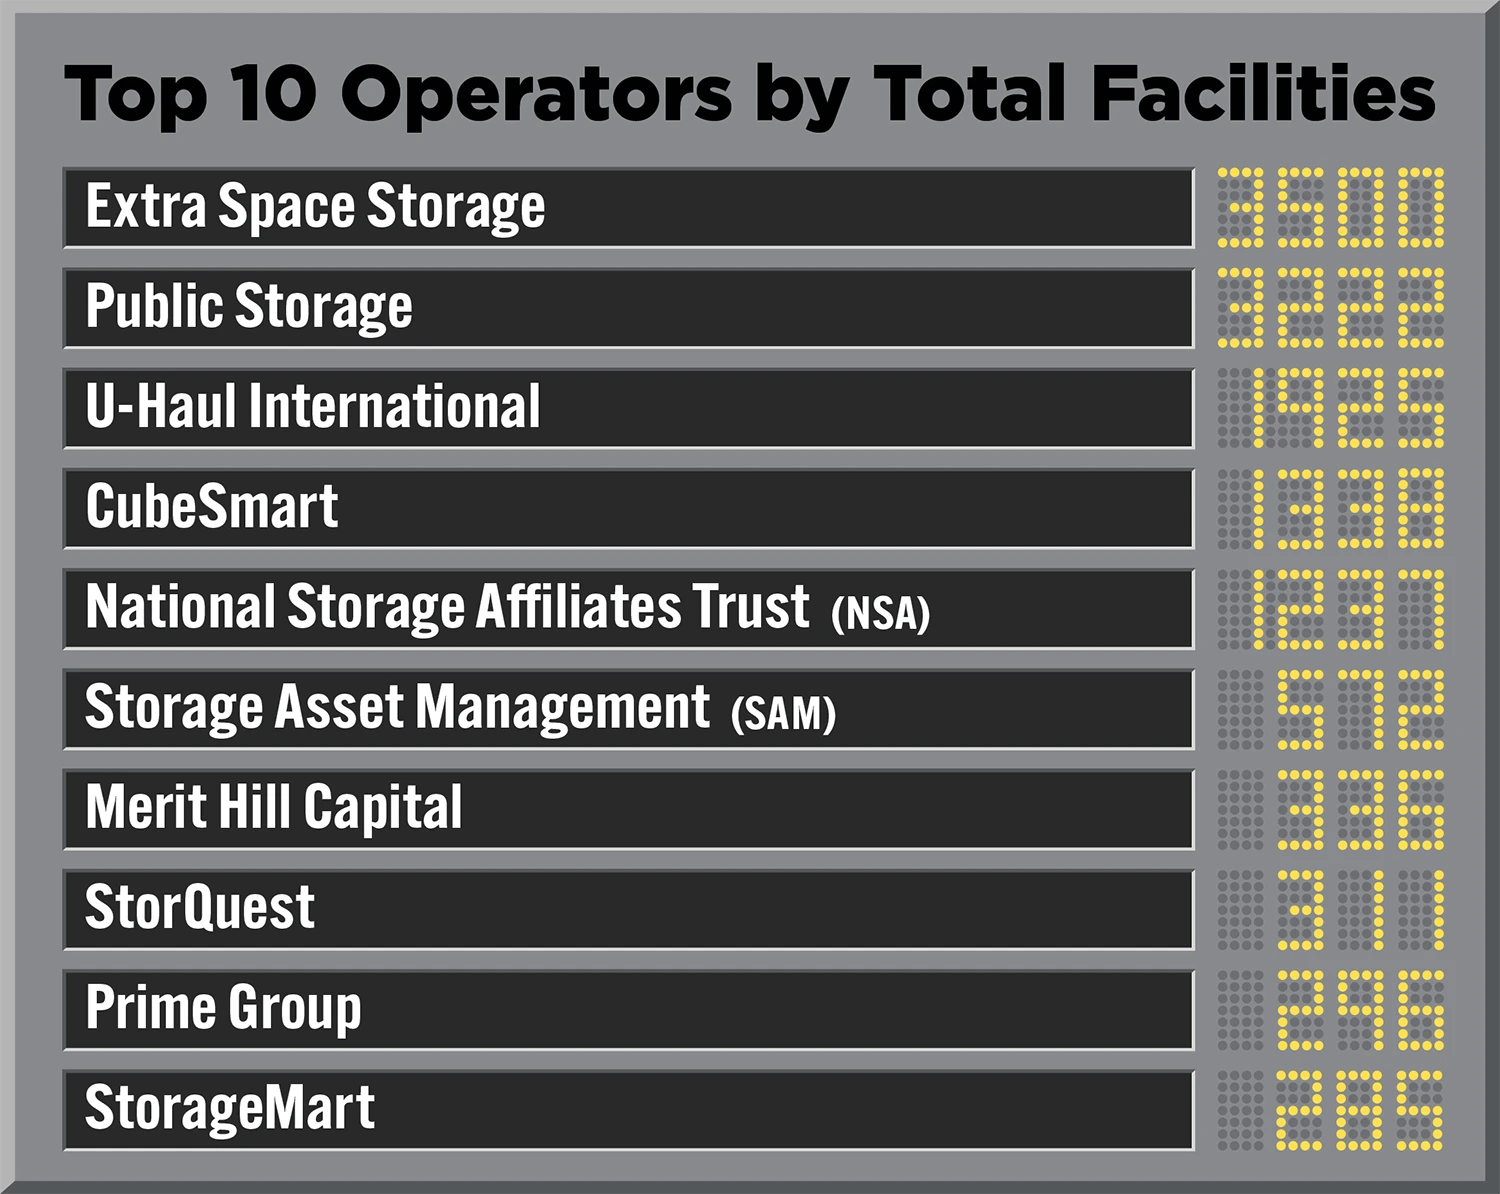 Top 10 Operators by Total Facilities